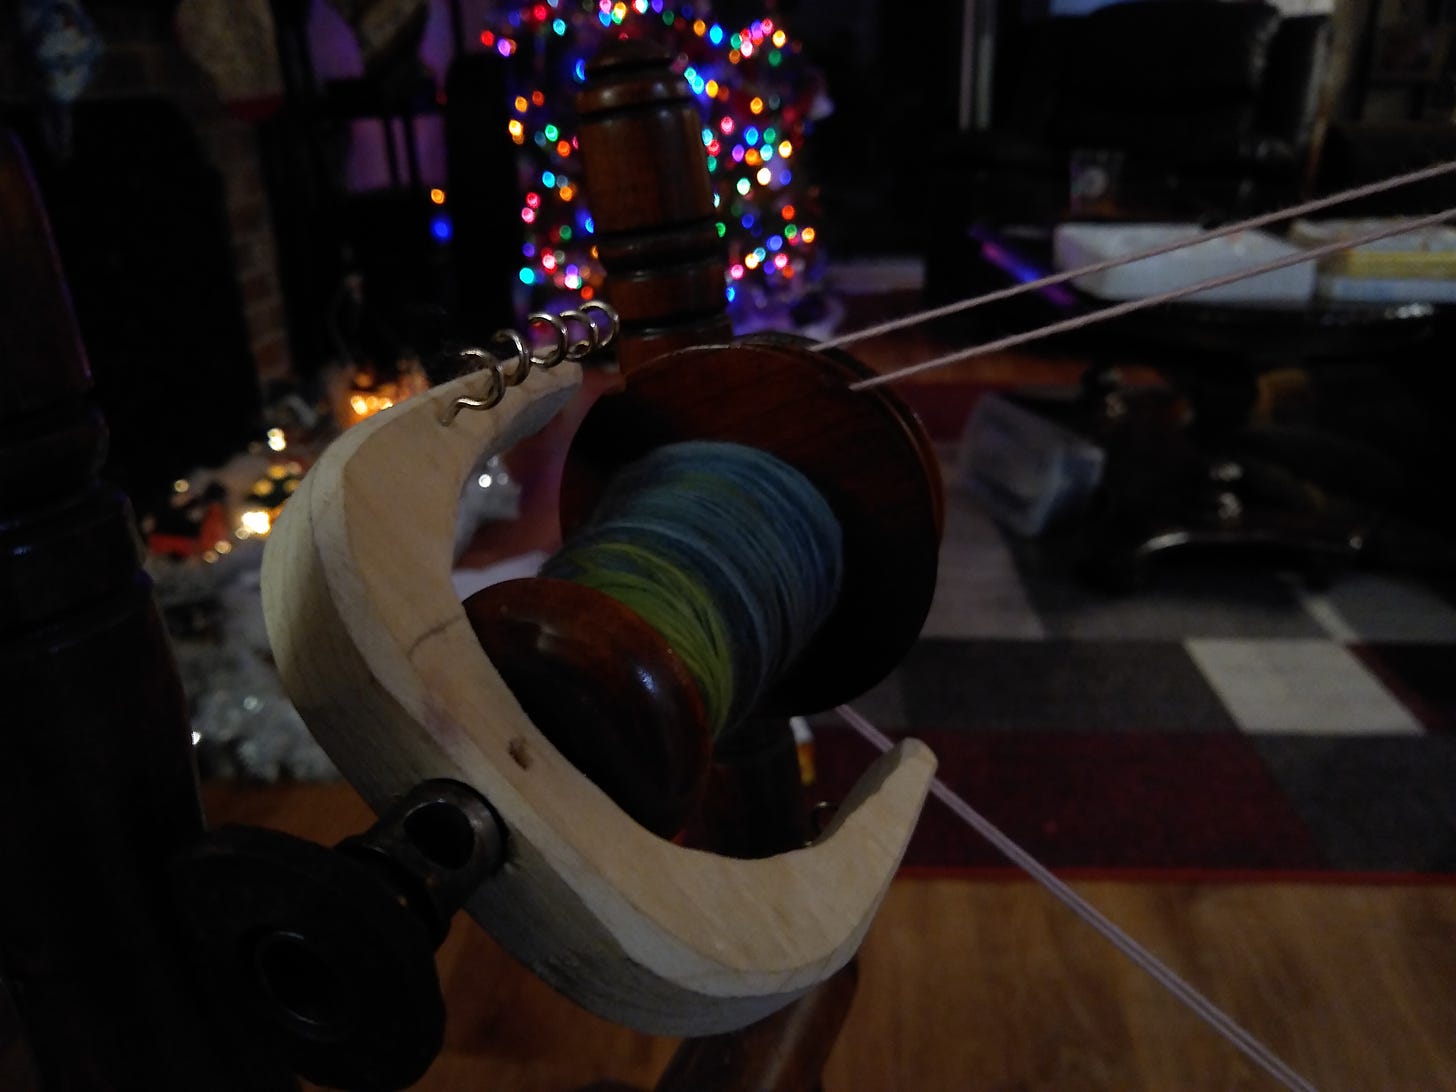 Dark picture of blue and green yarn on a bobbin on a spinning wheel, Christmas lights in the background